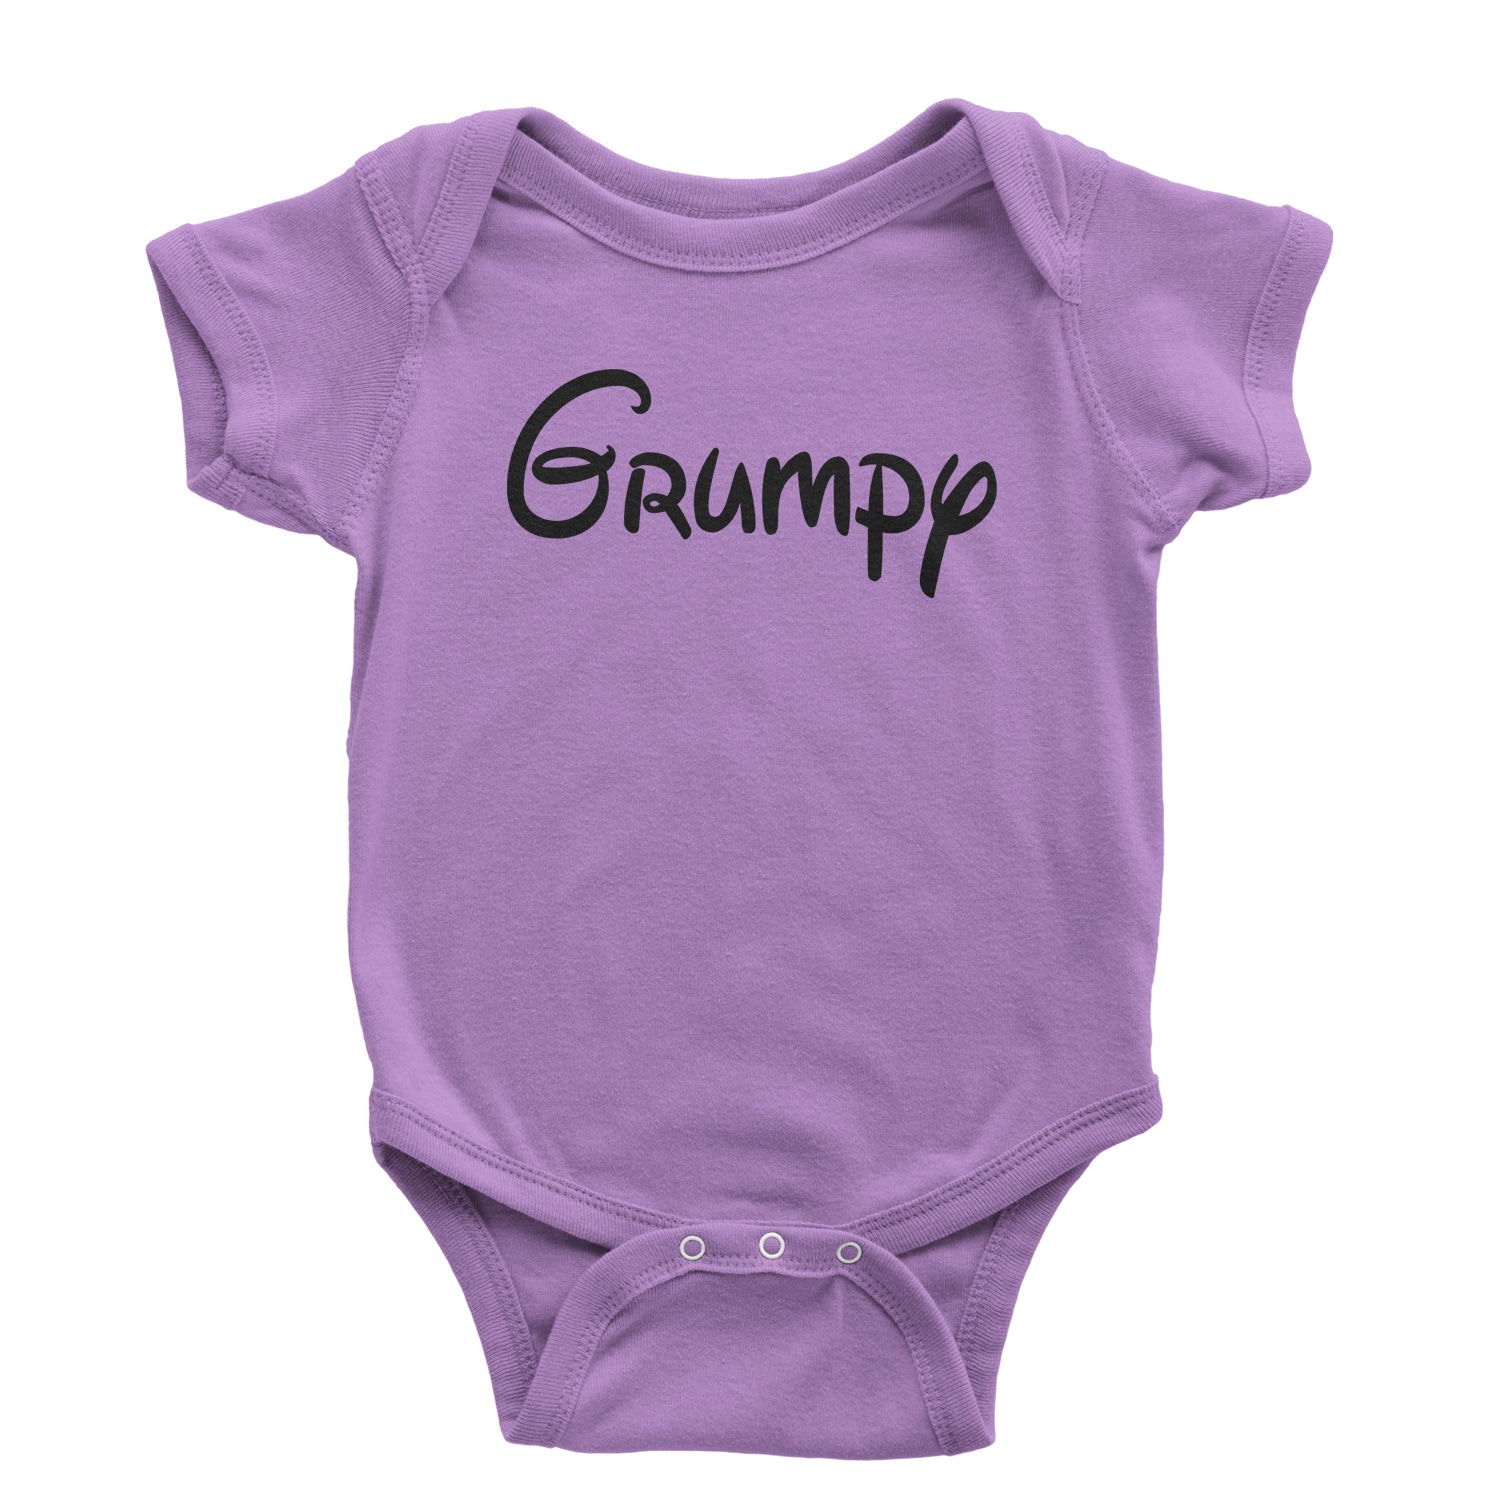 Grumpy - 7 Dwarfs Costume Infant One-Piece Romper Bodysuit and, costume, dwarfs, group, halloween, matching, seven, snow, the, white by Expression Tees